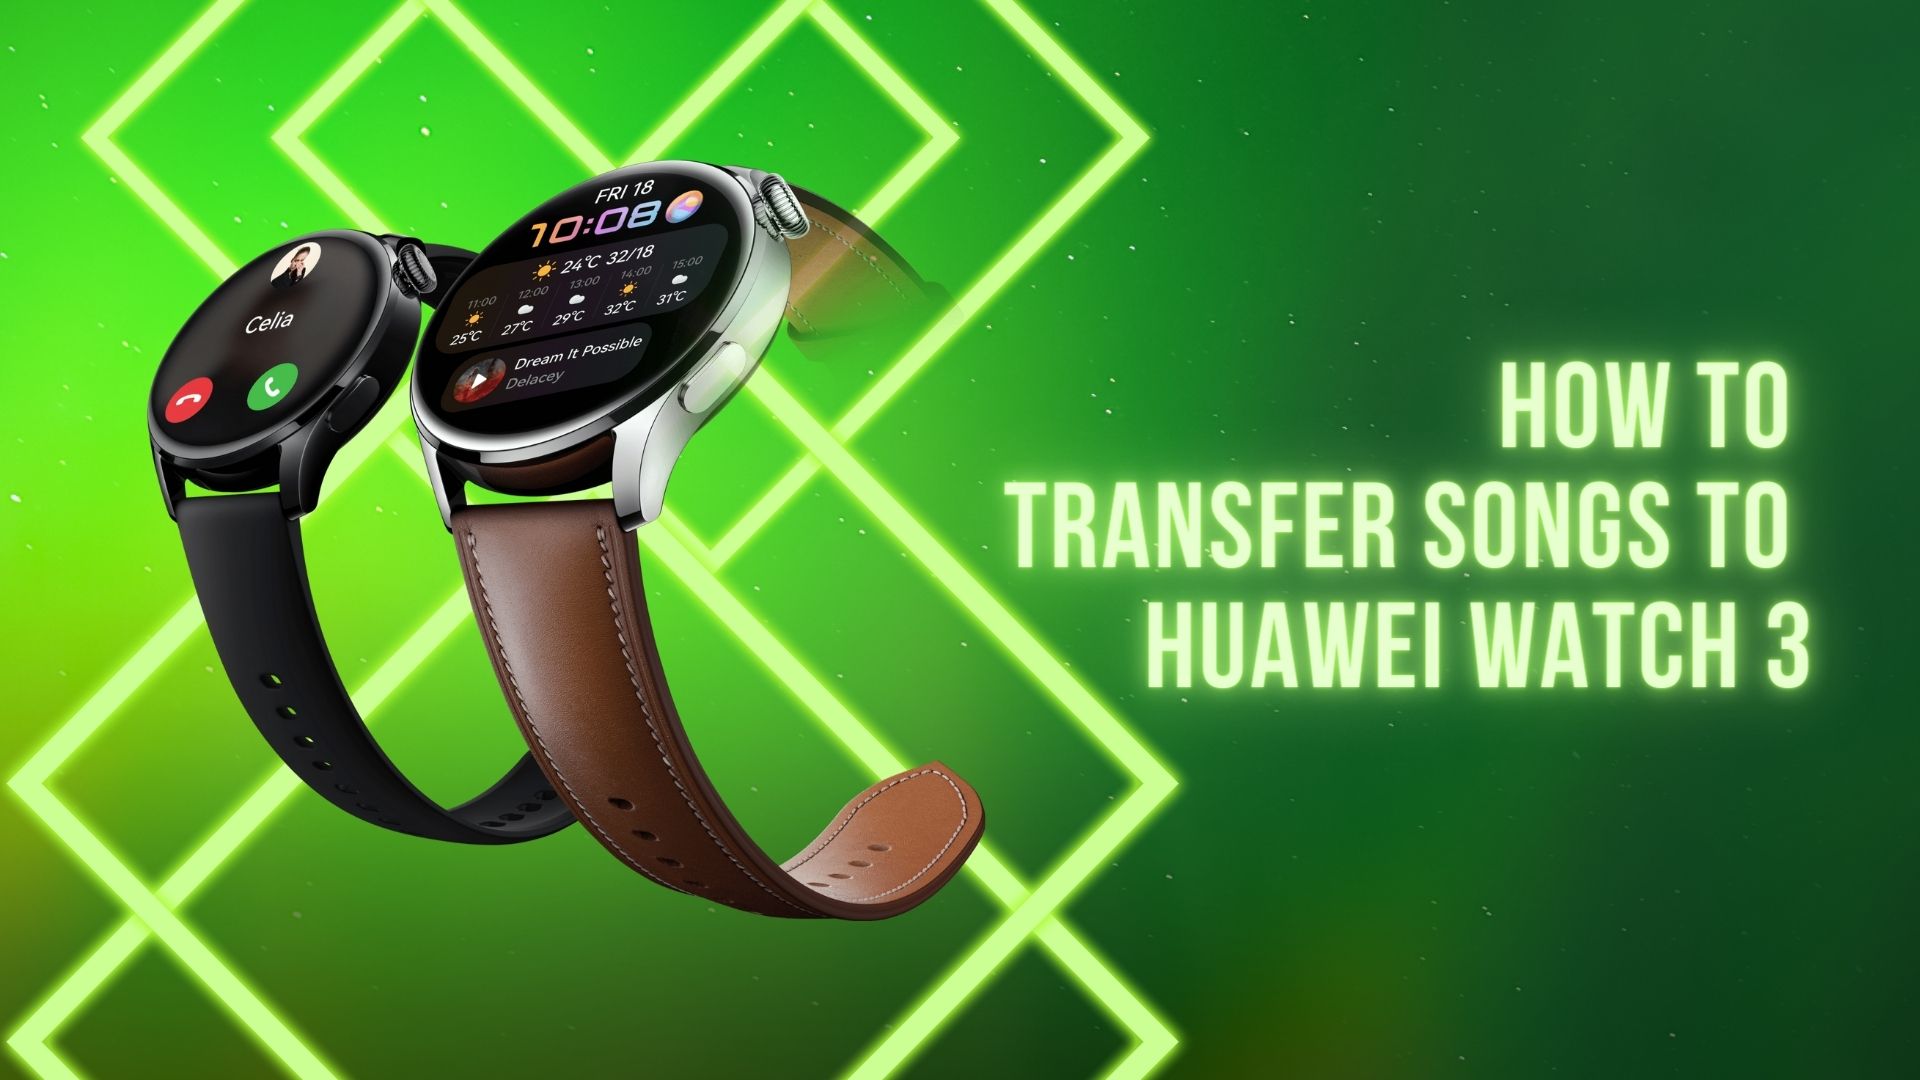 How To Transfer Songs to Huawei Watch 3